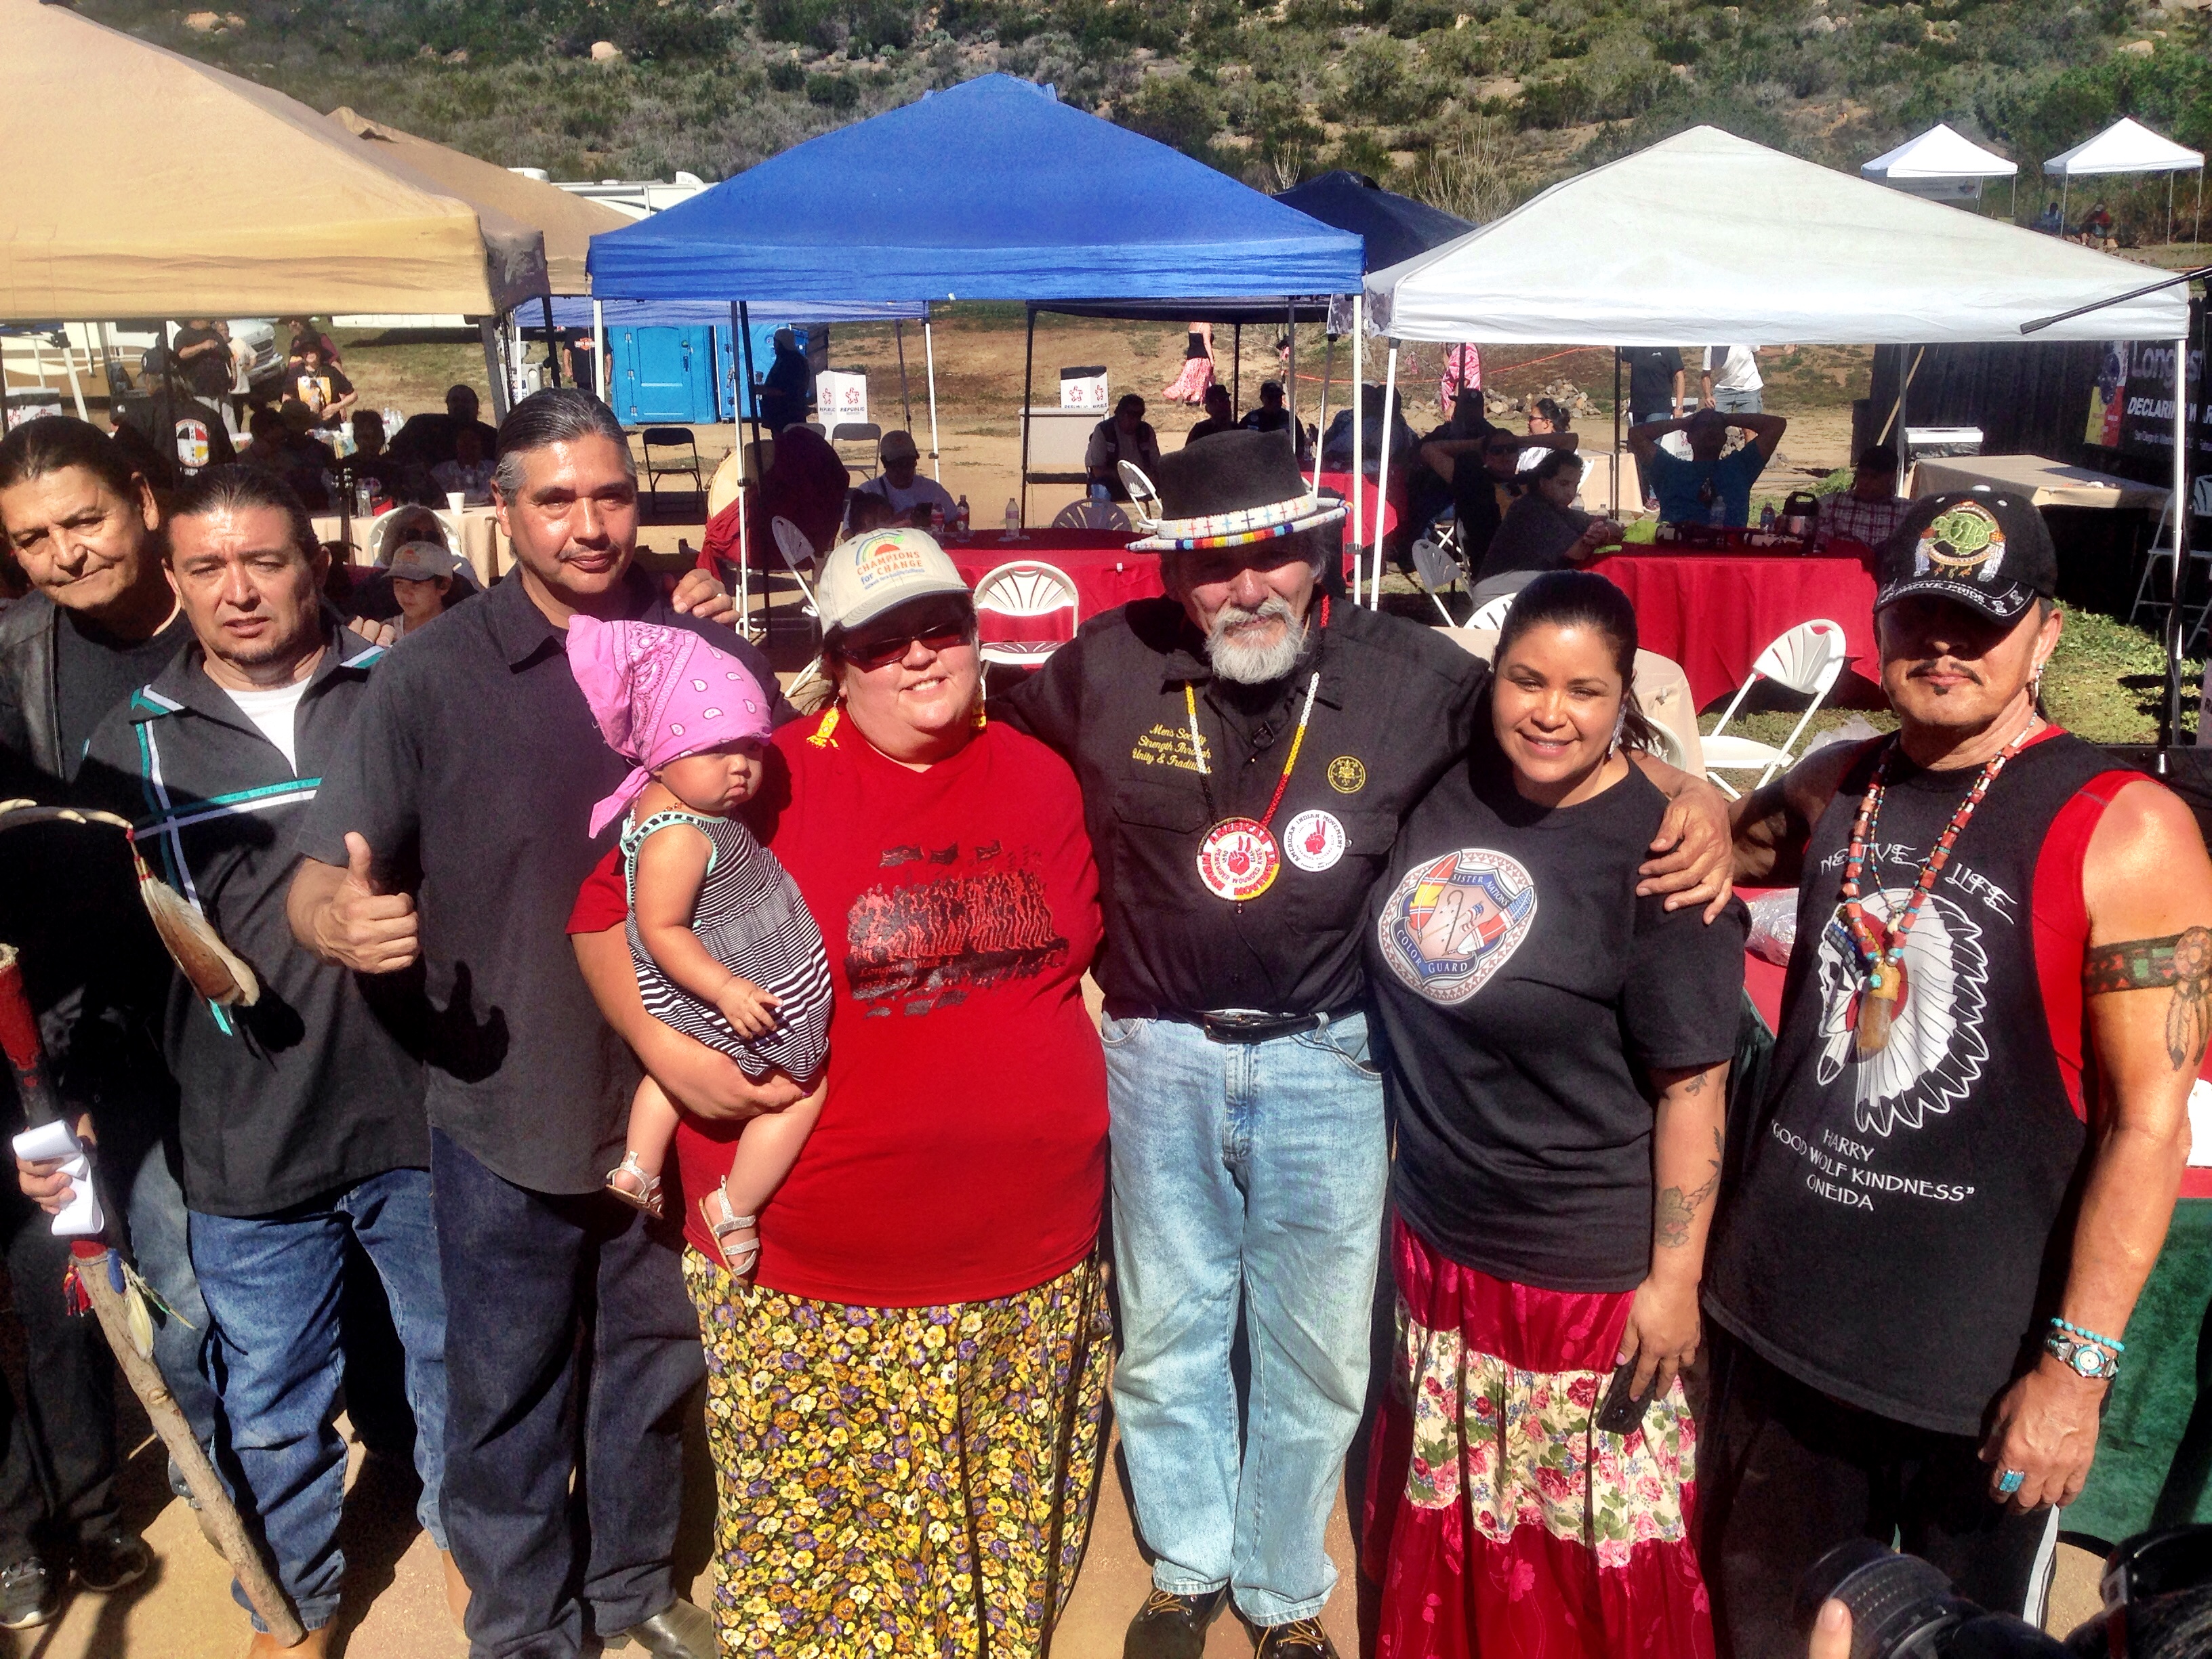 Dennis Banks surrounded by members of various California tribes from San Diego. Chief Harry Loving Kindness is on the far right and Orlando Vigil, National Coordinator is on the far left. The woman to Denniss right is Sherry LaBrake, coordinator from Sycuan Reservation, and the woman to his left is her assistant coordinator. (Courtesy Haig Born)